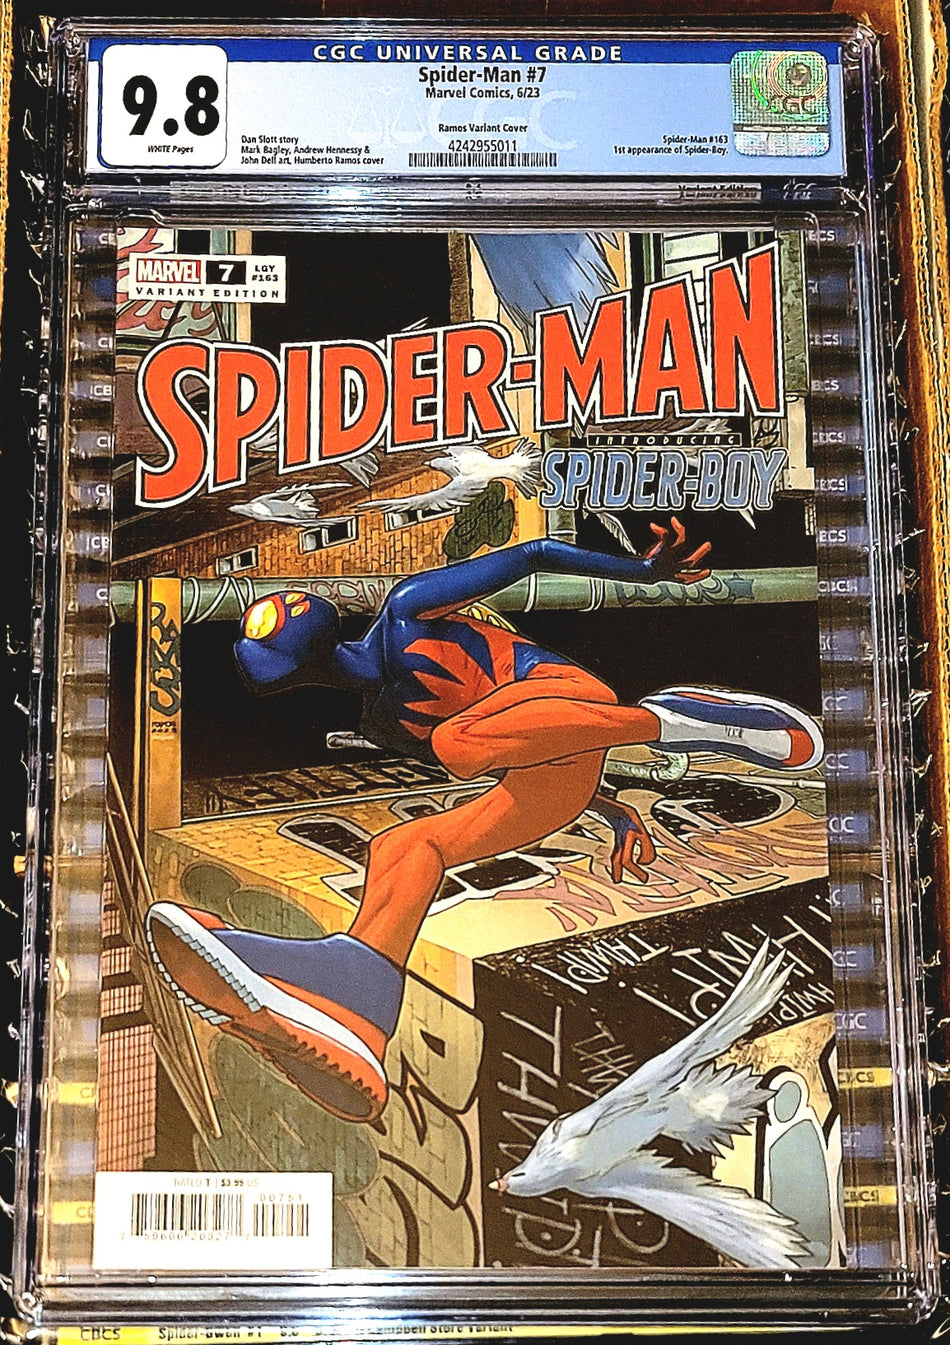 Spider-Man #7 Ramos Top Secret Spoiler Variant CGC 9.8 (1st Appearance of Spider-Boy)